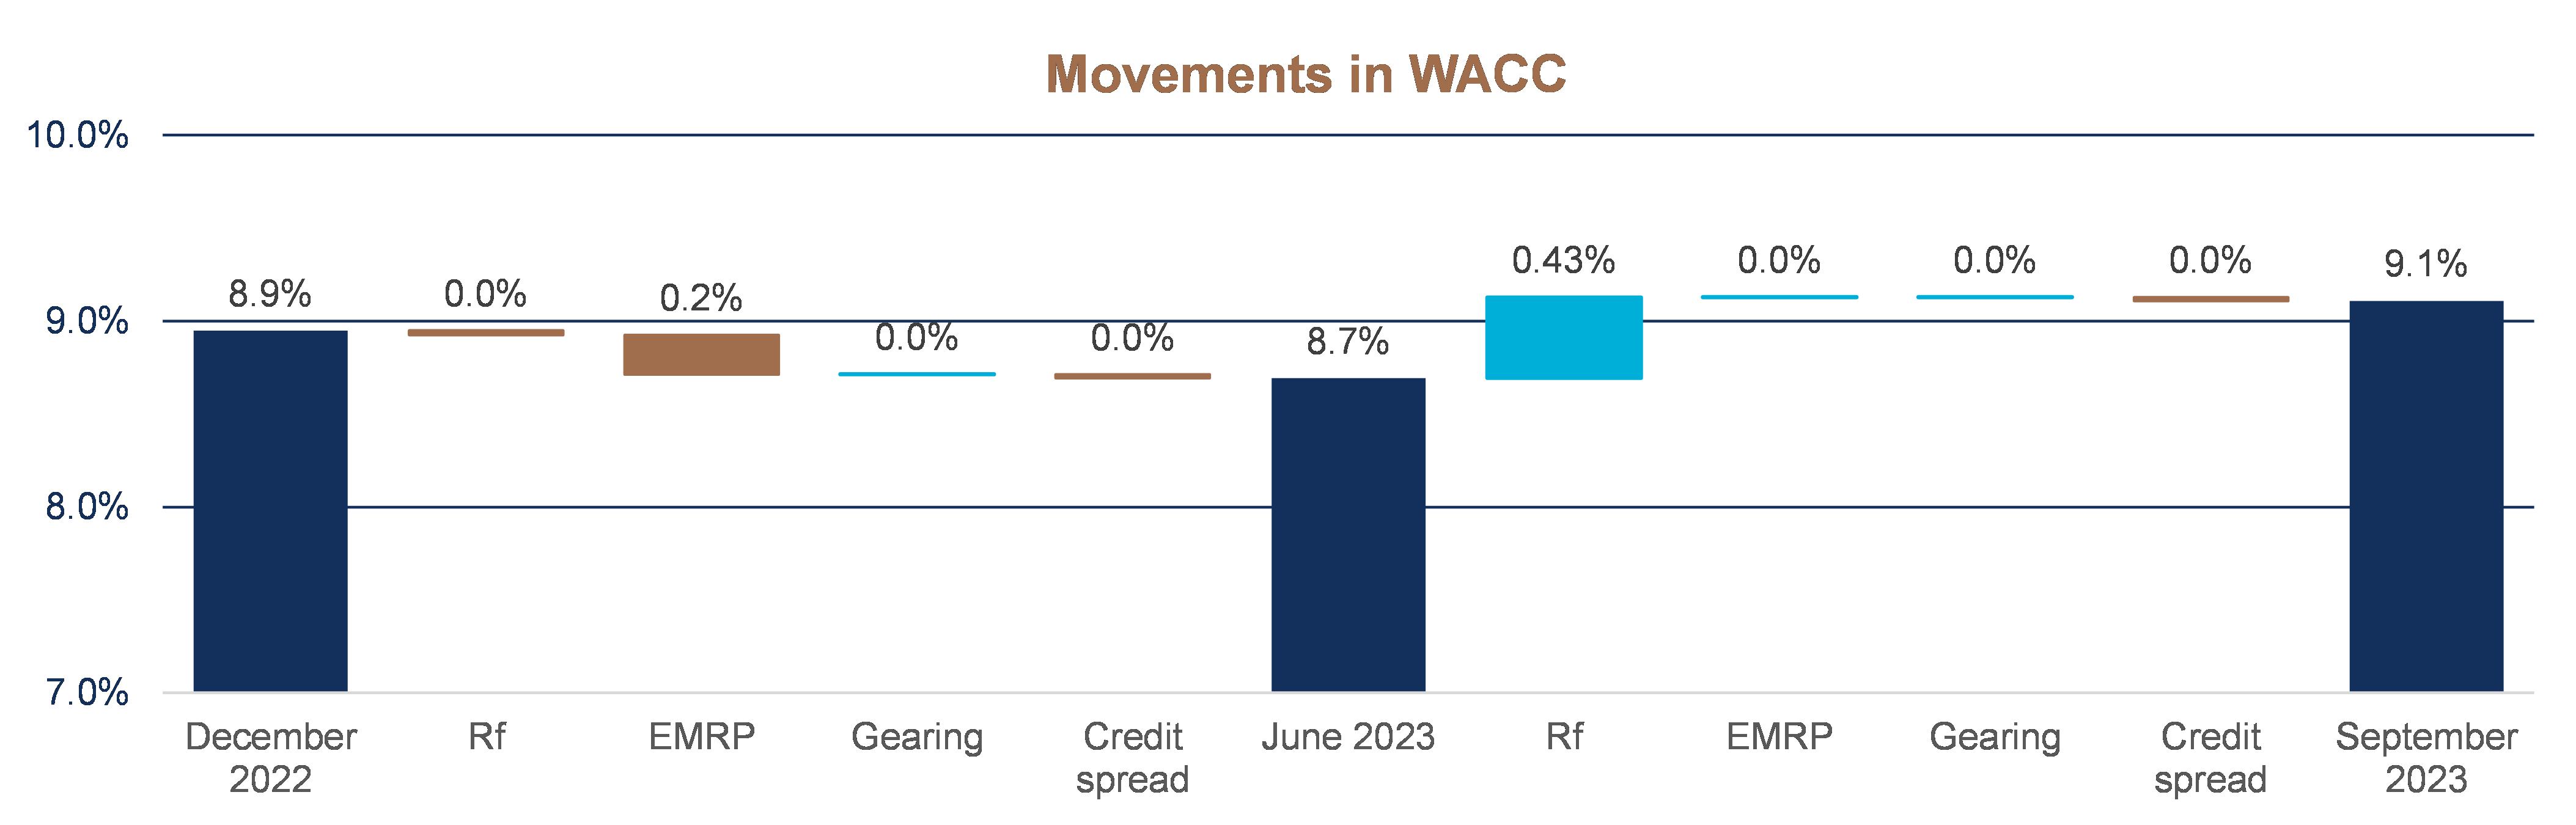 LH Movement in WACC image